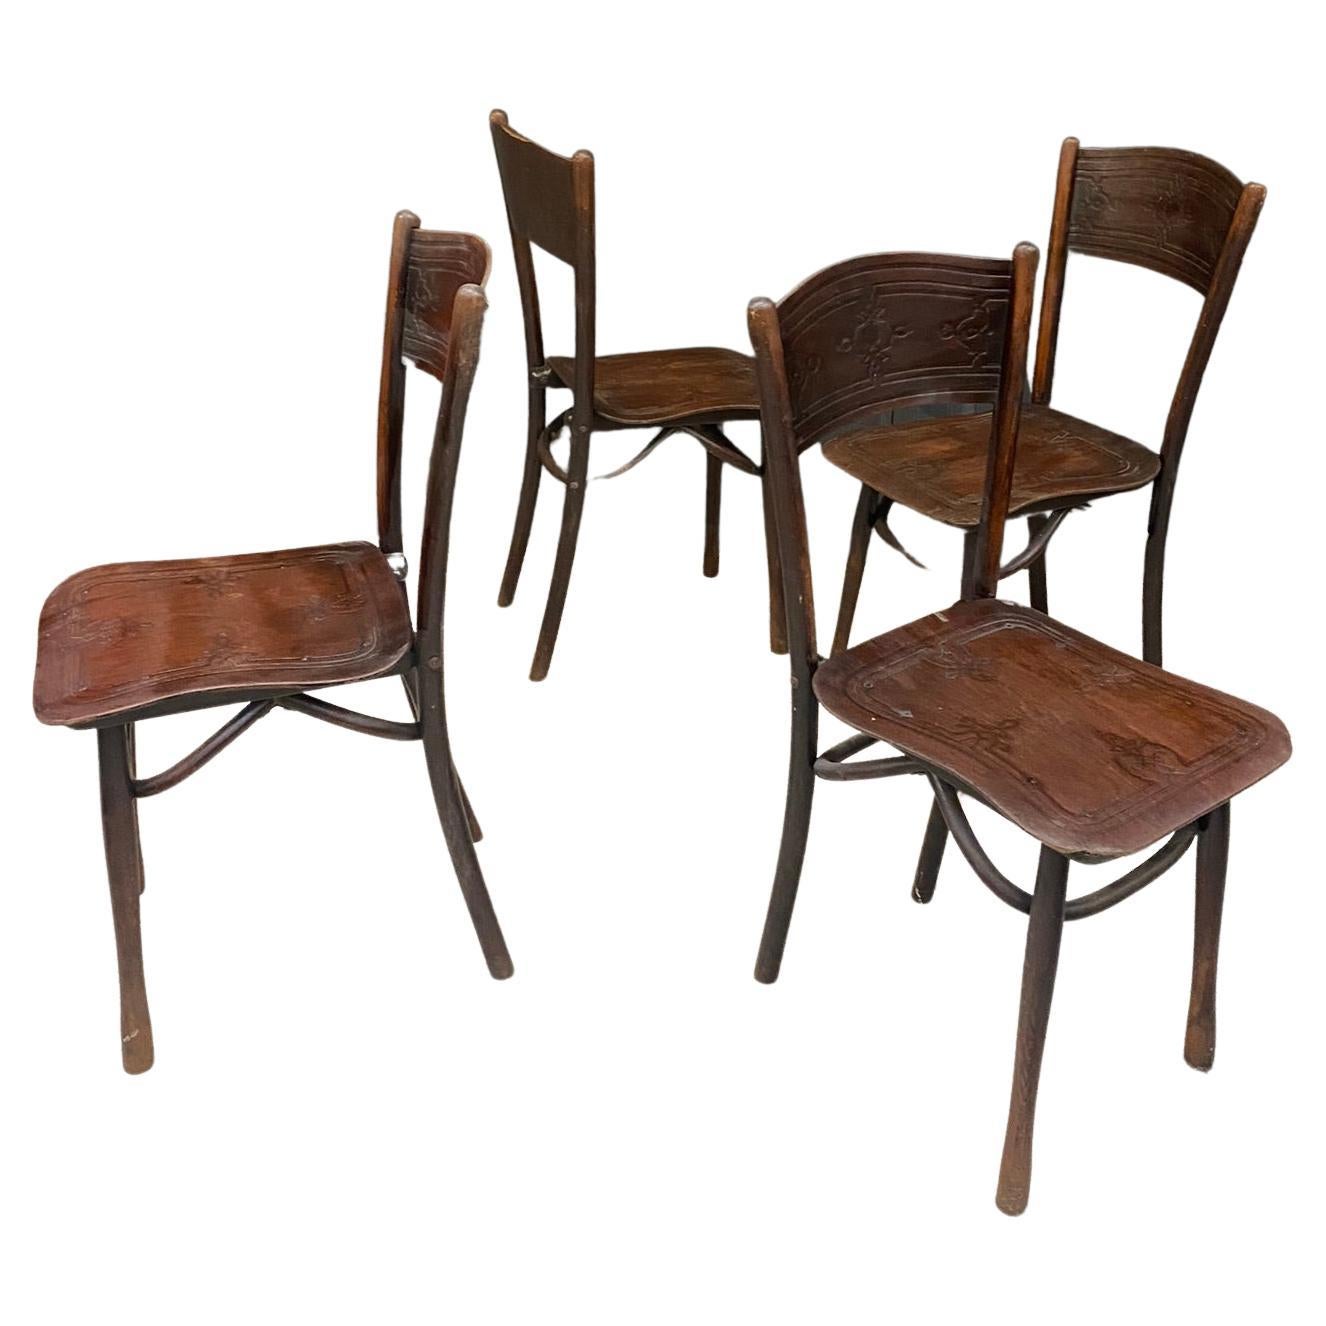 4 Antique Chairs from Jacob & Josef Kohn, circa 1900 For Sale